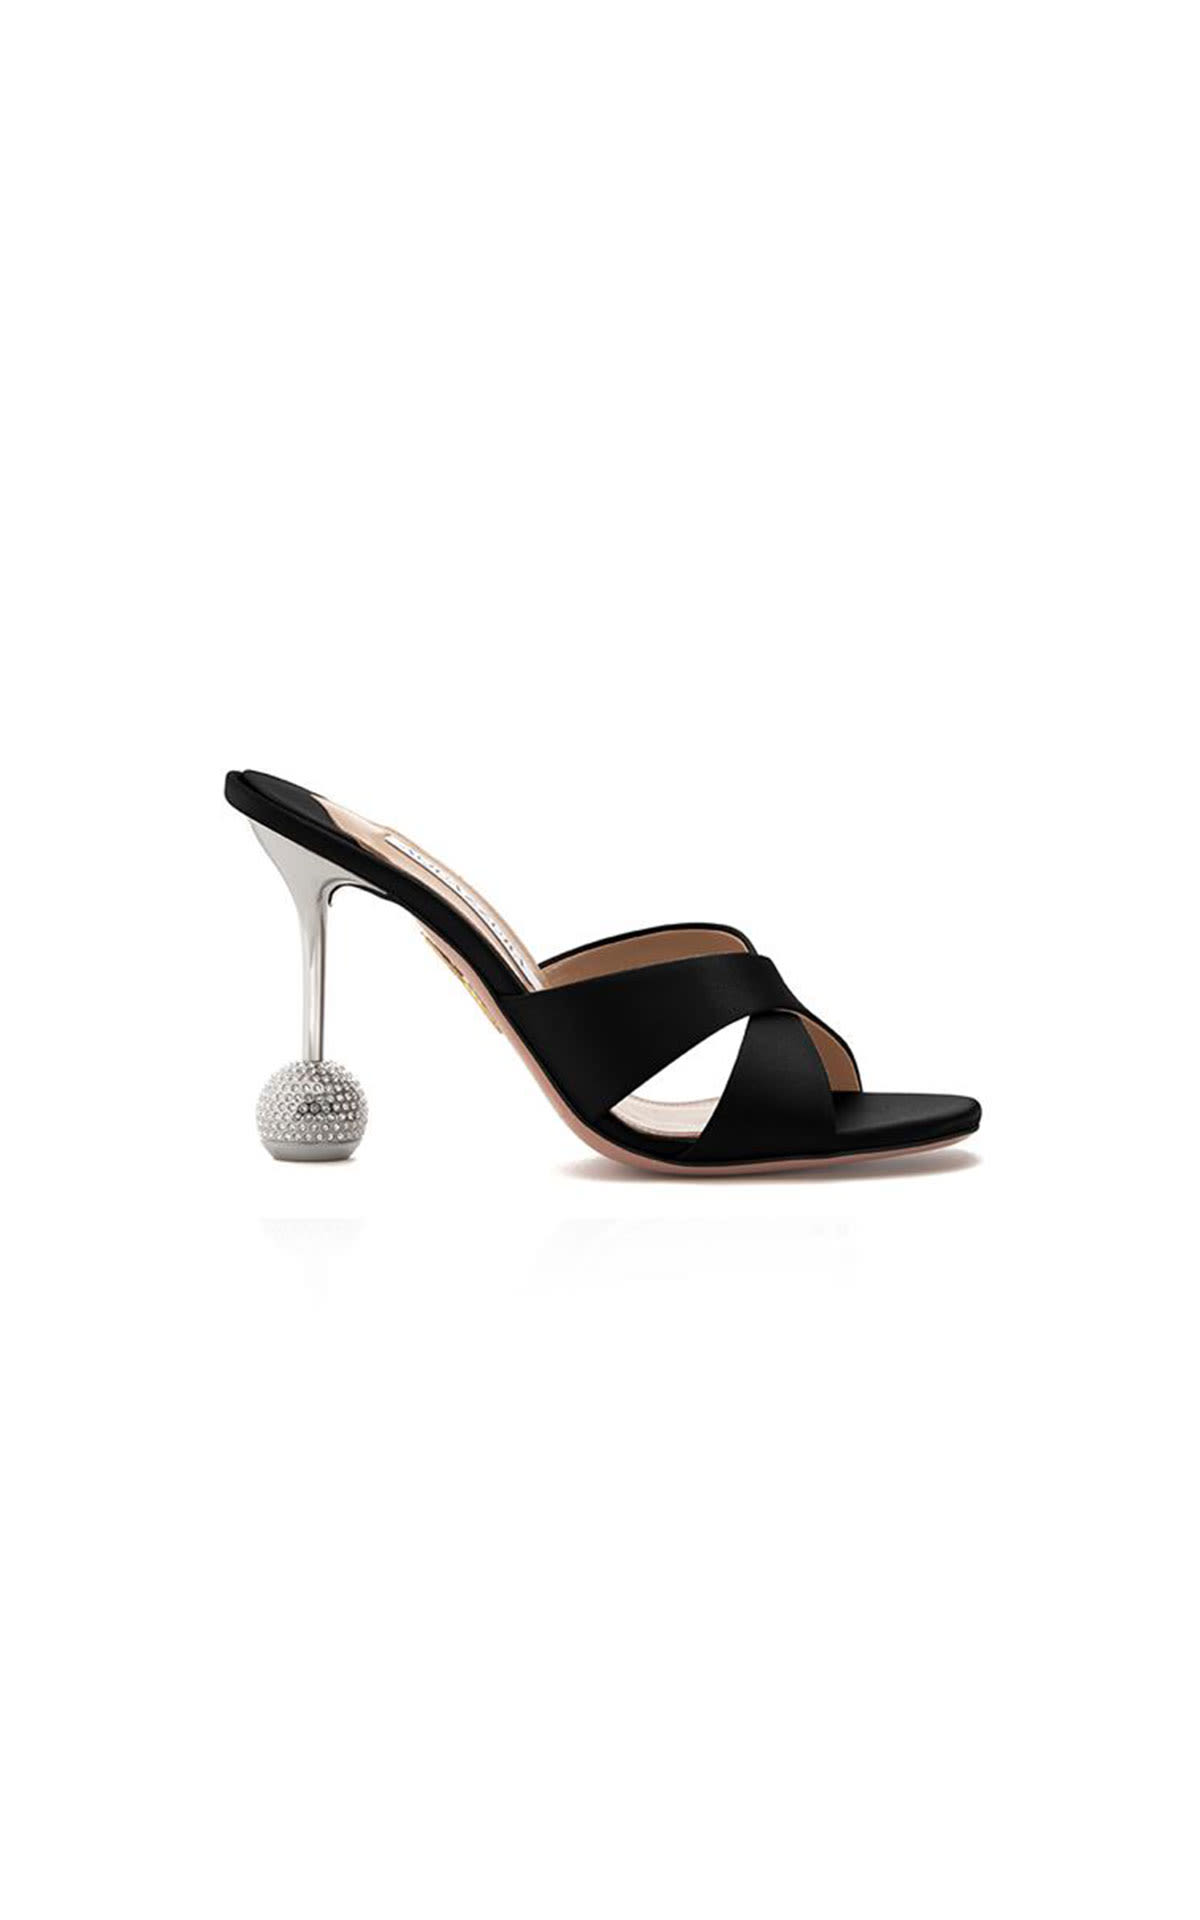 Aquazzura Yes darling mule 95 black from Bicester Village